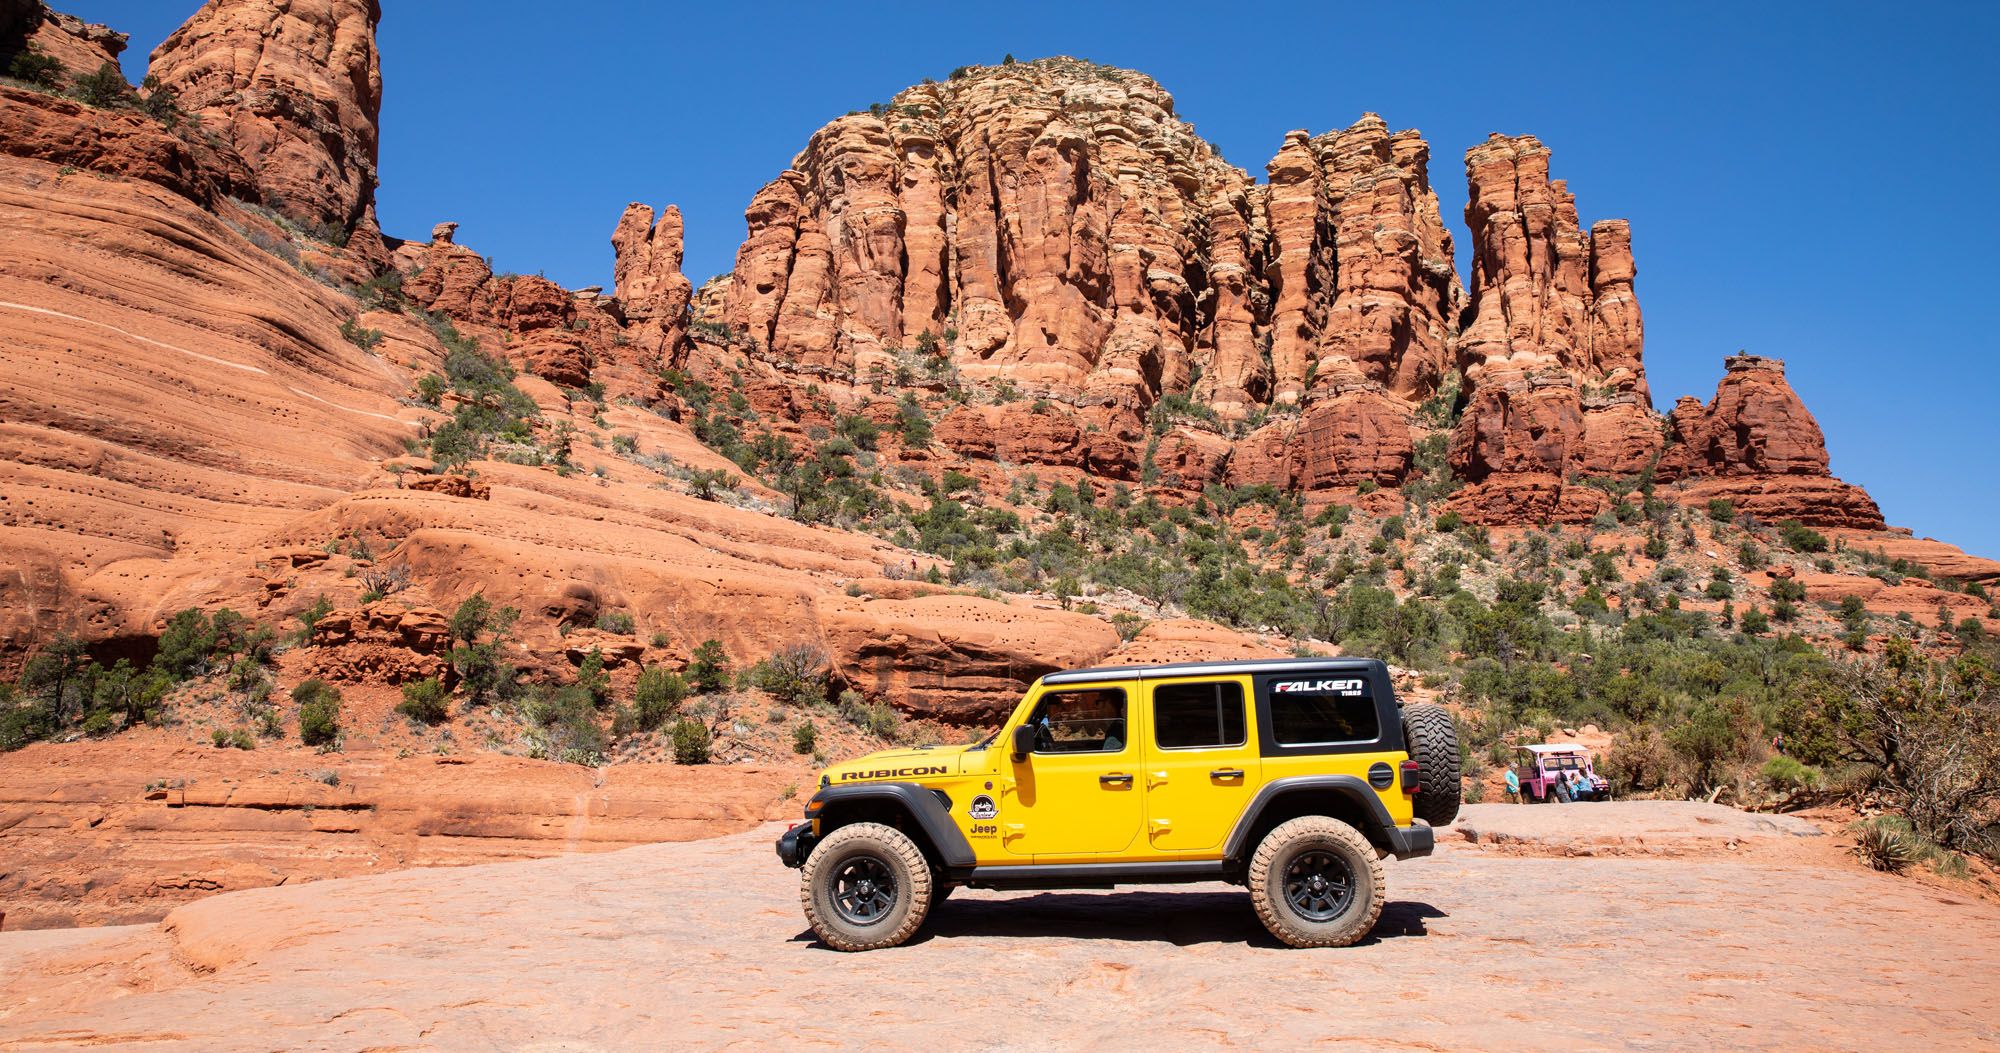 Featured image for “How to Drive the Broken Arrow 4WD Trail in Sedona, Arizona”